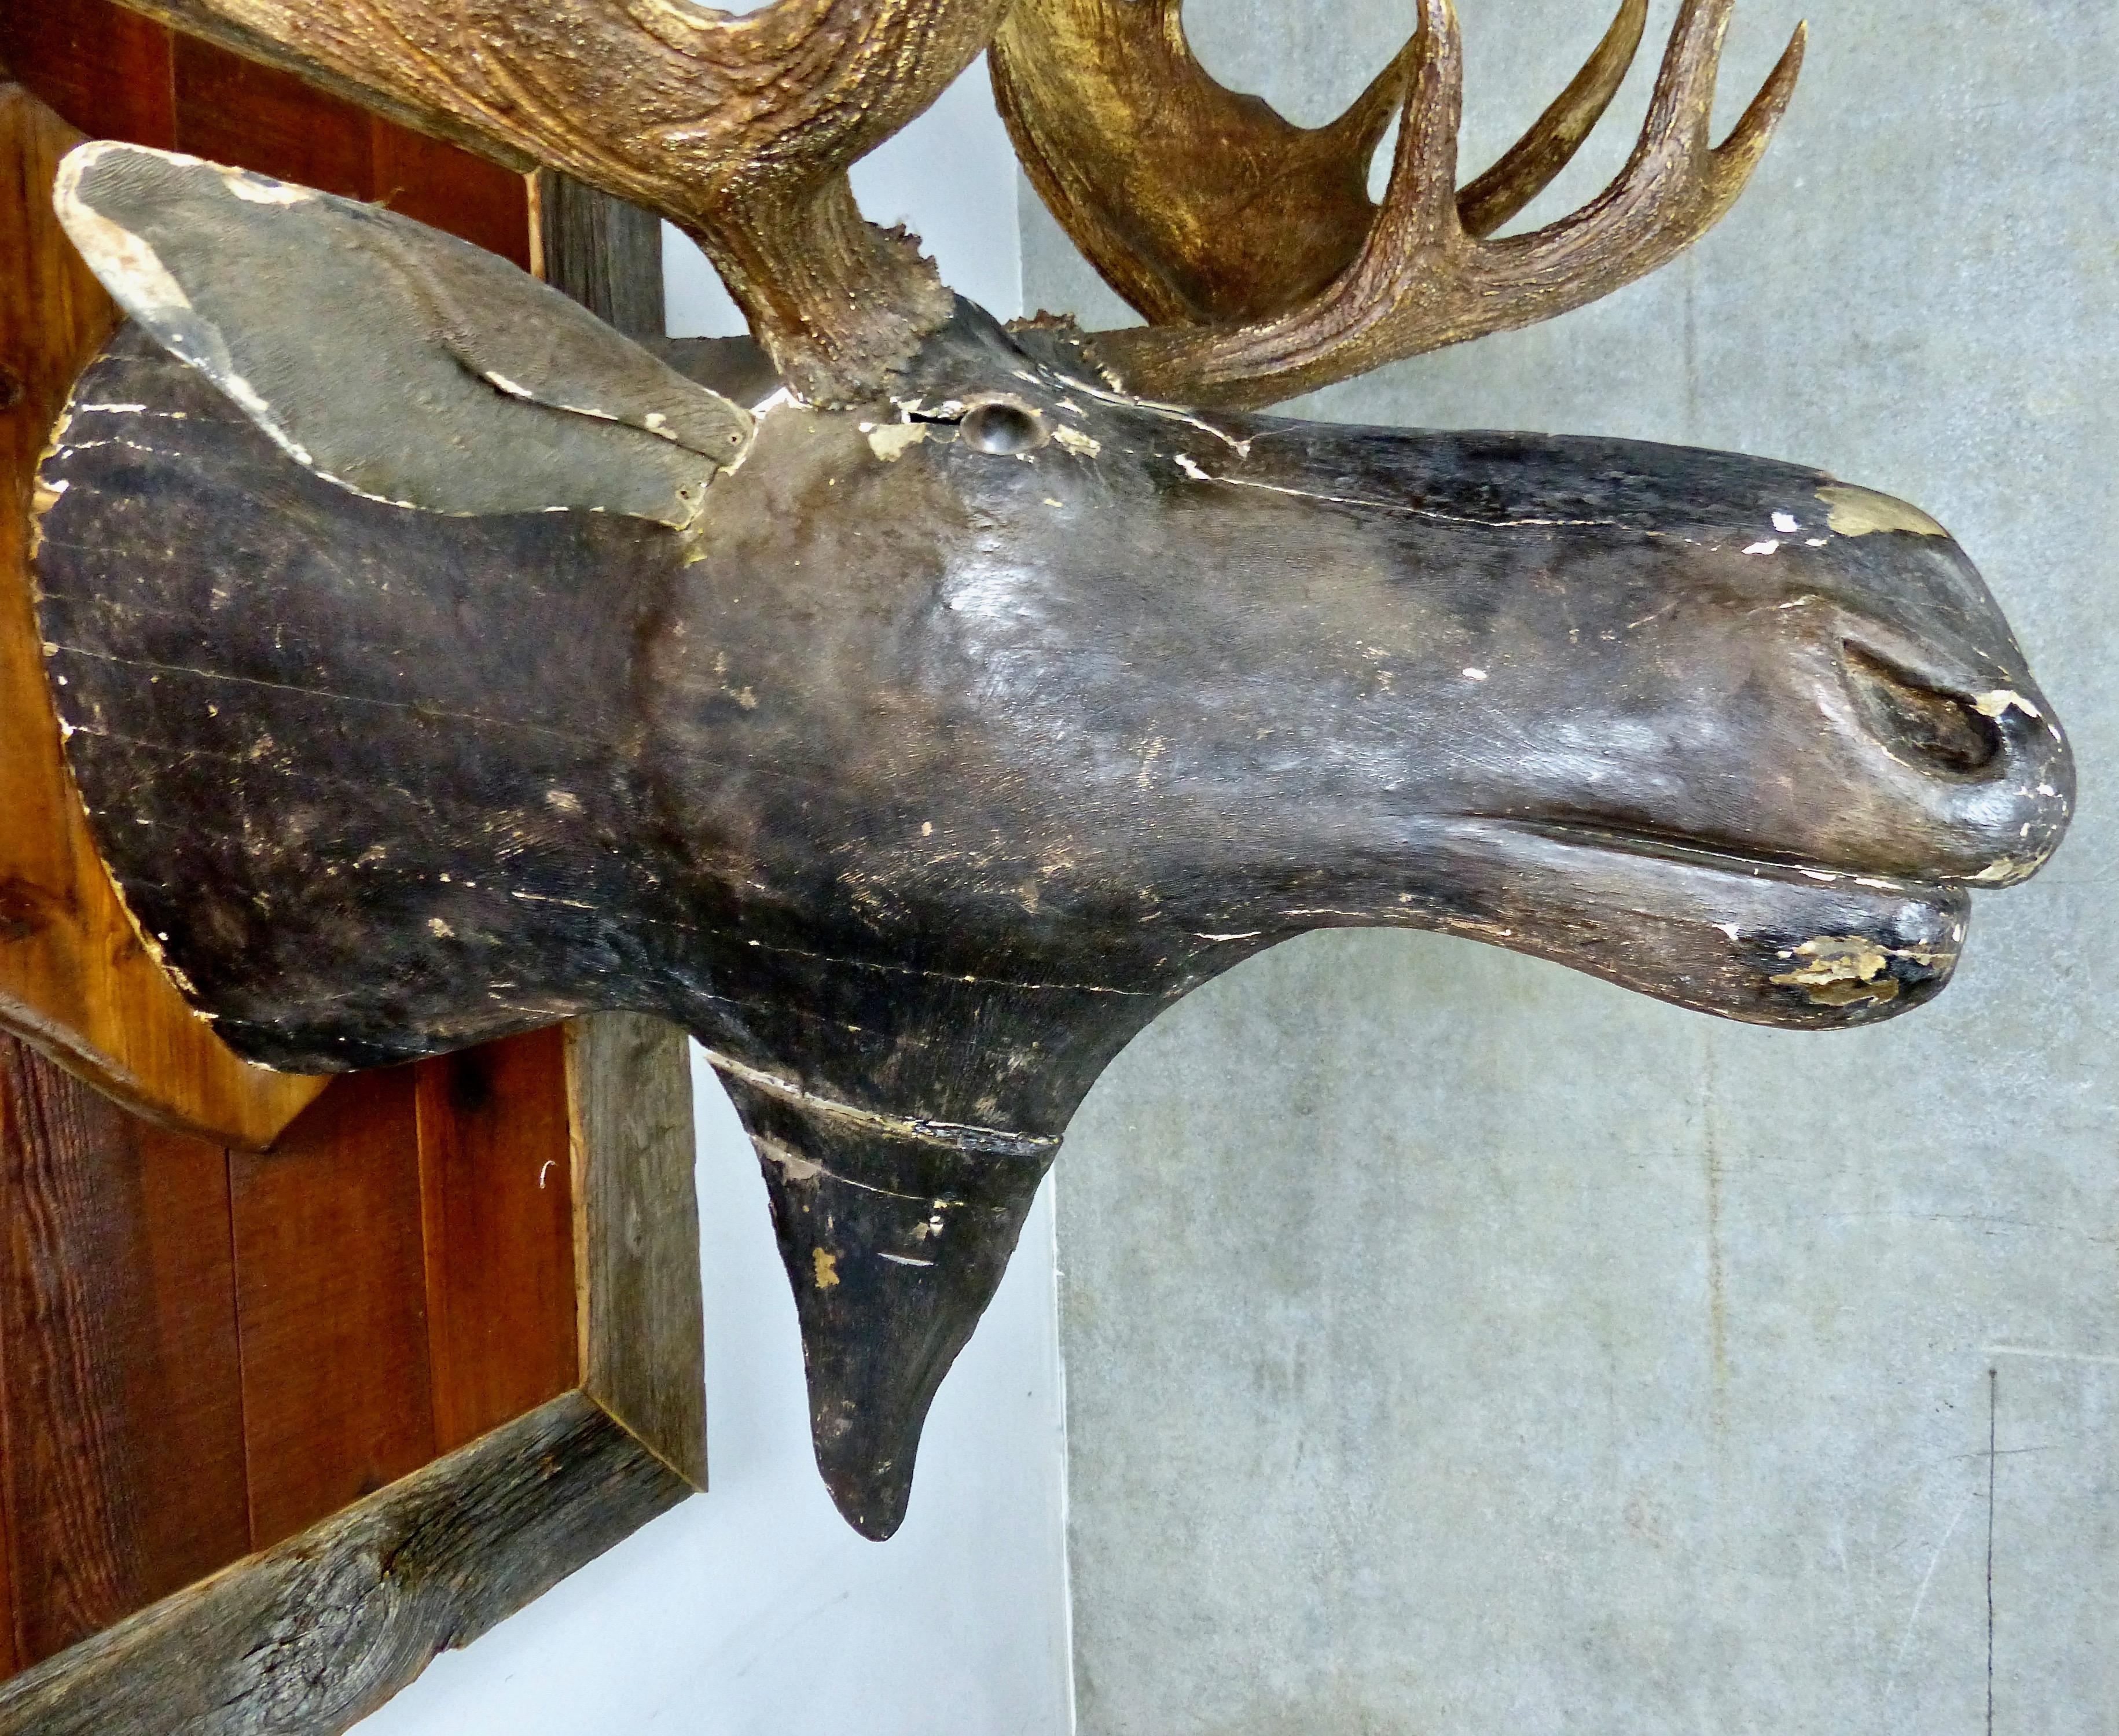 Hand carved wooden moose head with authentic, eight-point antlers. An excellent example of early Quebec Folk Art.
Attributed to Herbert Tomlinson Portneuf County
Mounted on a 48” x 36” wooden back board.
Dimensions: 48 H” x 51 W” x 40 D”.